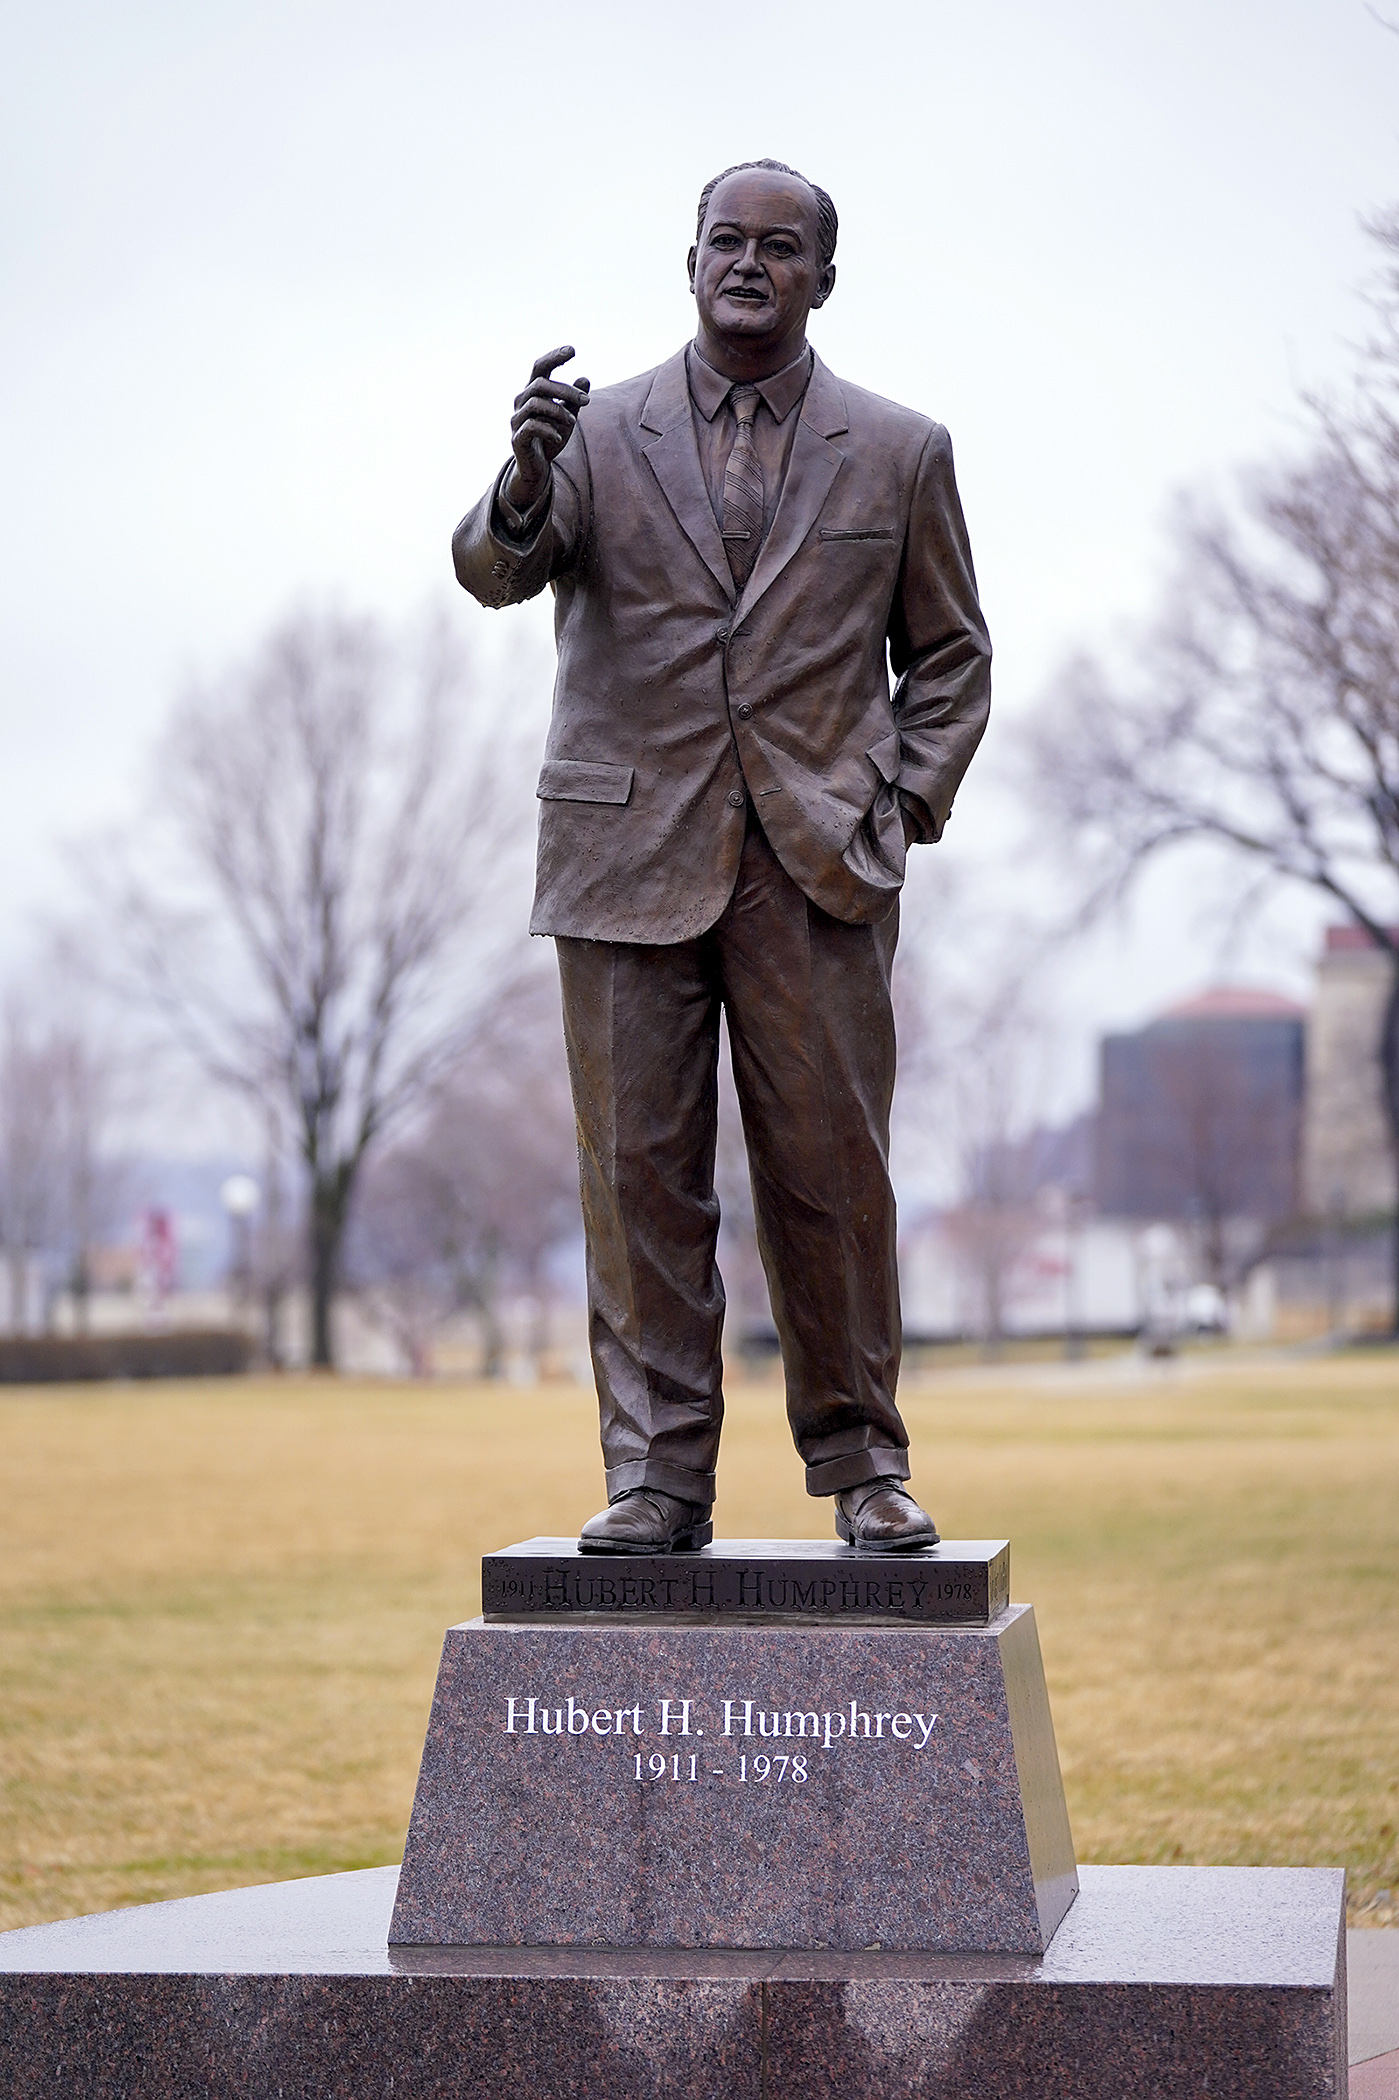 The Hubert H. Humphrey Memorial on the Capitol grounds pictured April 8. (Photo by Michele Jokinen)